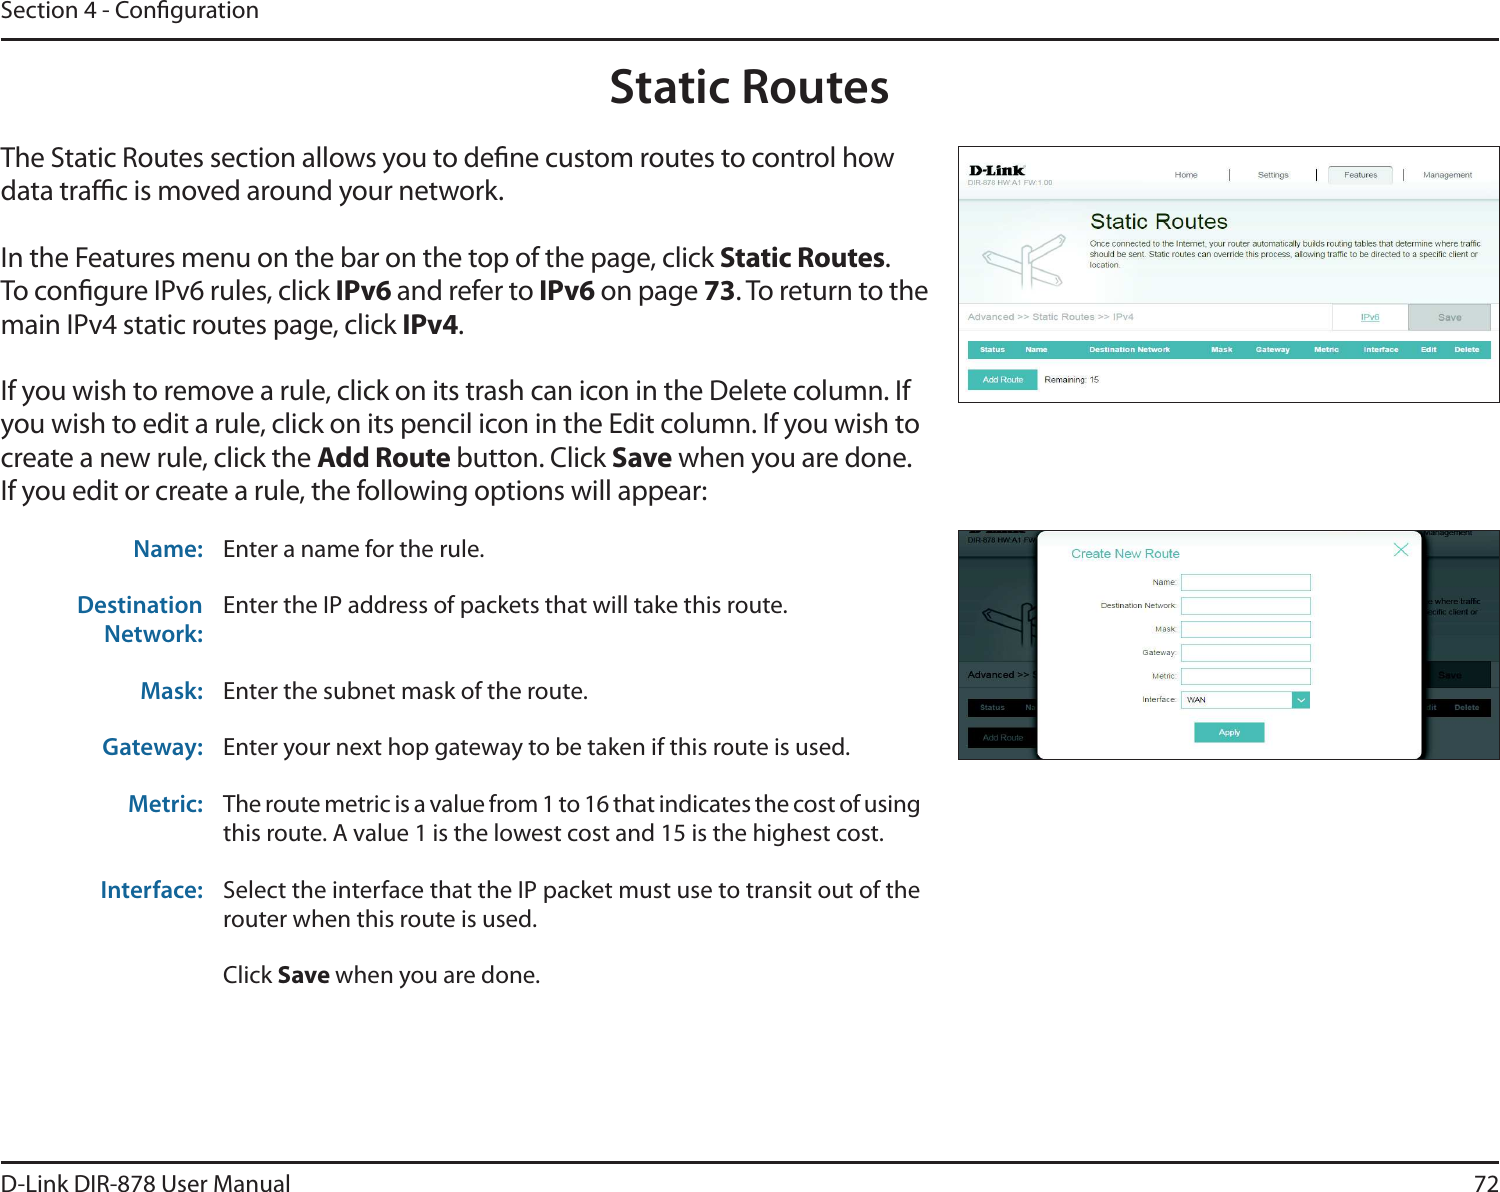 72D-Link DIR-878 User ManualSection 4 - CongurationStatic RoutesThe Static Routes section allows you to dene custom routes to control how data trac is moved around your network.In the Features menu on the bar on the top of the page, click Static Routes.To congure IPv6 rules, click IPv6 and refer to IPv6 on page 73. To return to the main IPv4 static routes page, click IPv4.If you wish to remove a rule, click on its trash can icon in the Delete column. If you wish to edit a rule, click on its pencil icon in the Edit column. If you wish to create a new rule, click the &quot;EE3PVUFbutton. Click Save when you are done. If you edit or create a rule, the following options will appear:Name: Enter a name for the rule.Destination Network:Enter the IP address of packets that will take this route.Mask: Enter the subnet mask of the route.Gateway: Enter your next hop gateway to be taken if this route is used.Metric: The route metric is a value from 1 to 16 that indicates the cost of using this route. A value 1 is the lowest cost and 15 is the highest cost.Interface: Select the interface that the IP packet must use to transit out of the router when this route is used.Click Save when you are done.